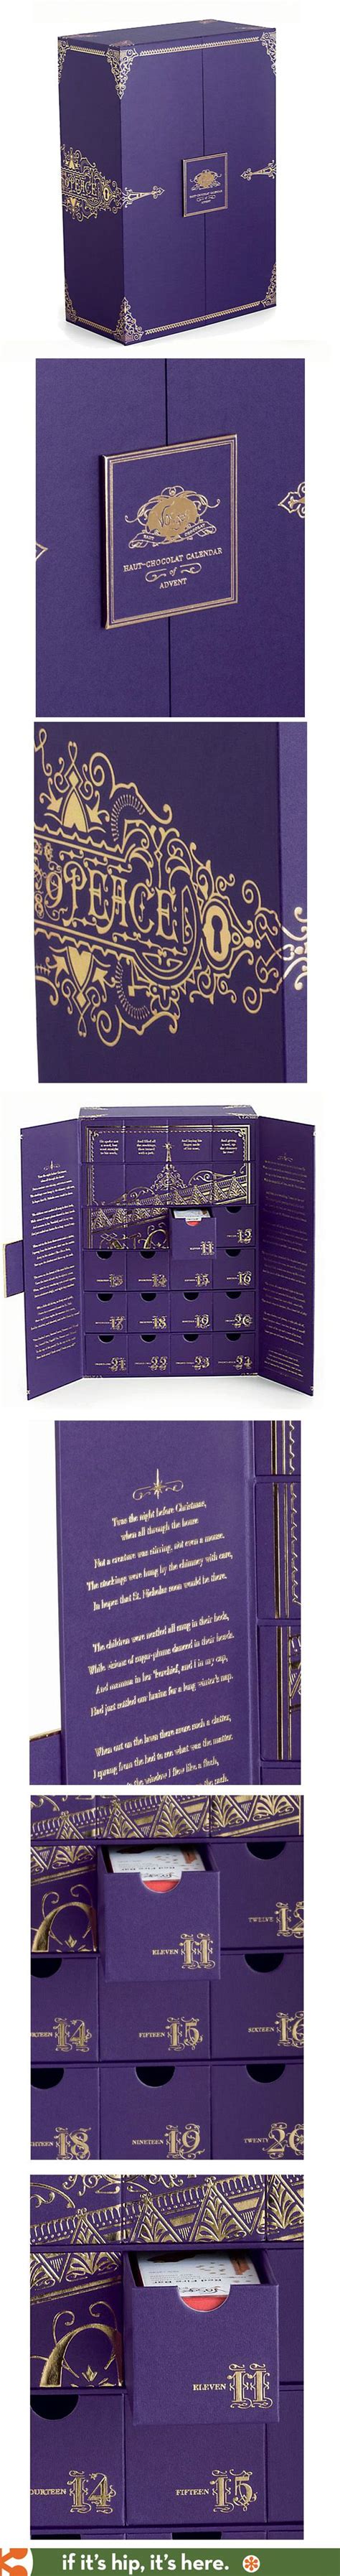 Fill out my online form. Vosges Haut Chocolat Advent Calendar with gold foil printing. | Chocolate packaging design ...